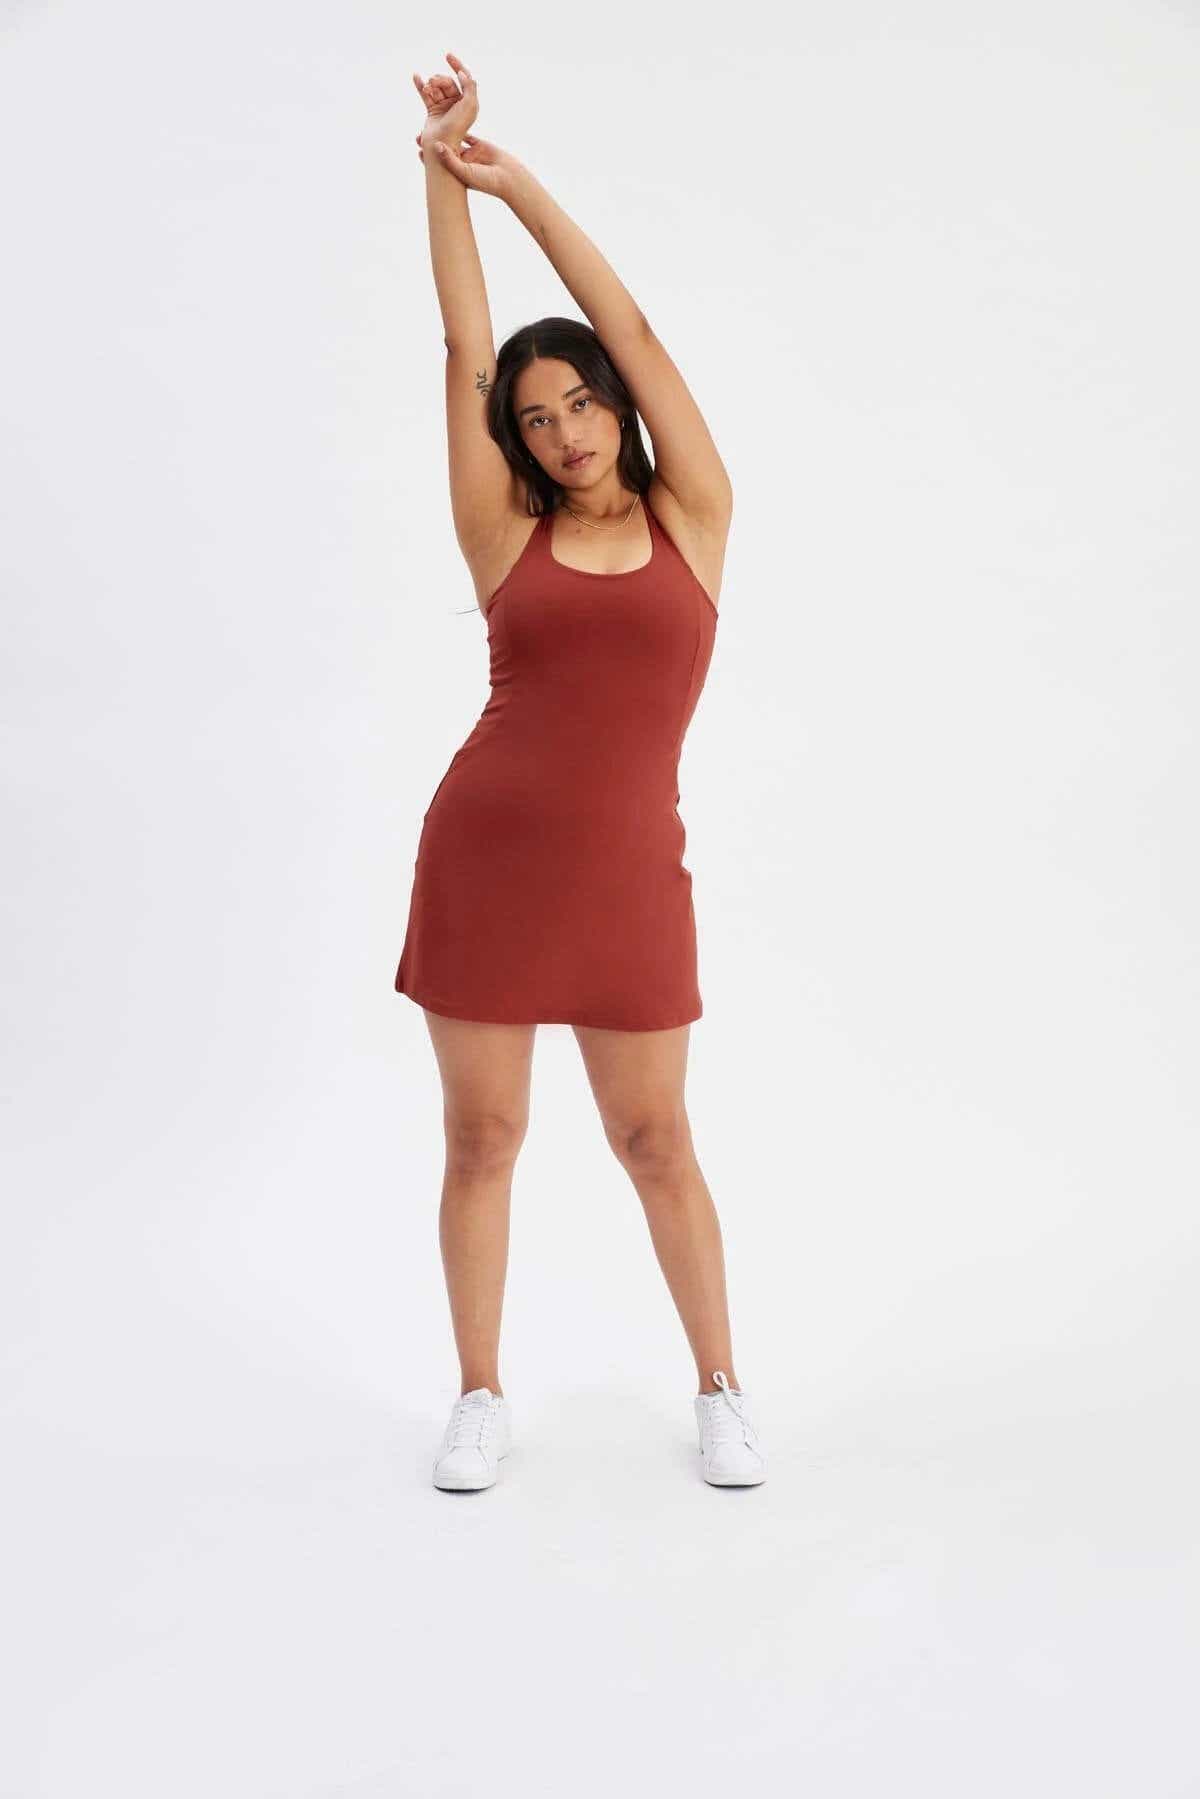 model standing in red workout dress